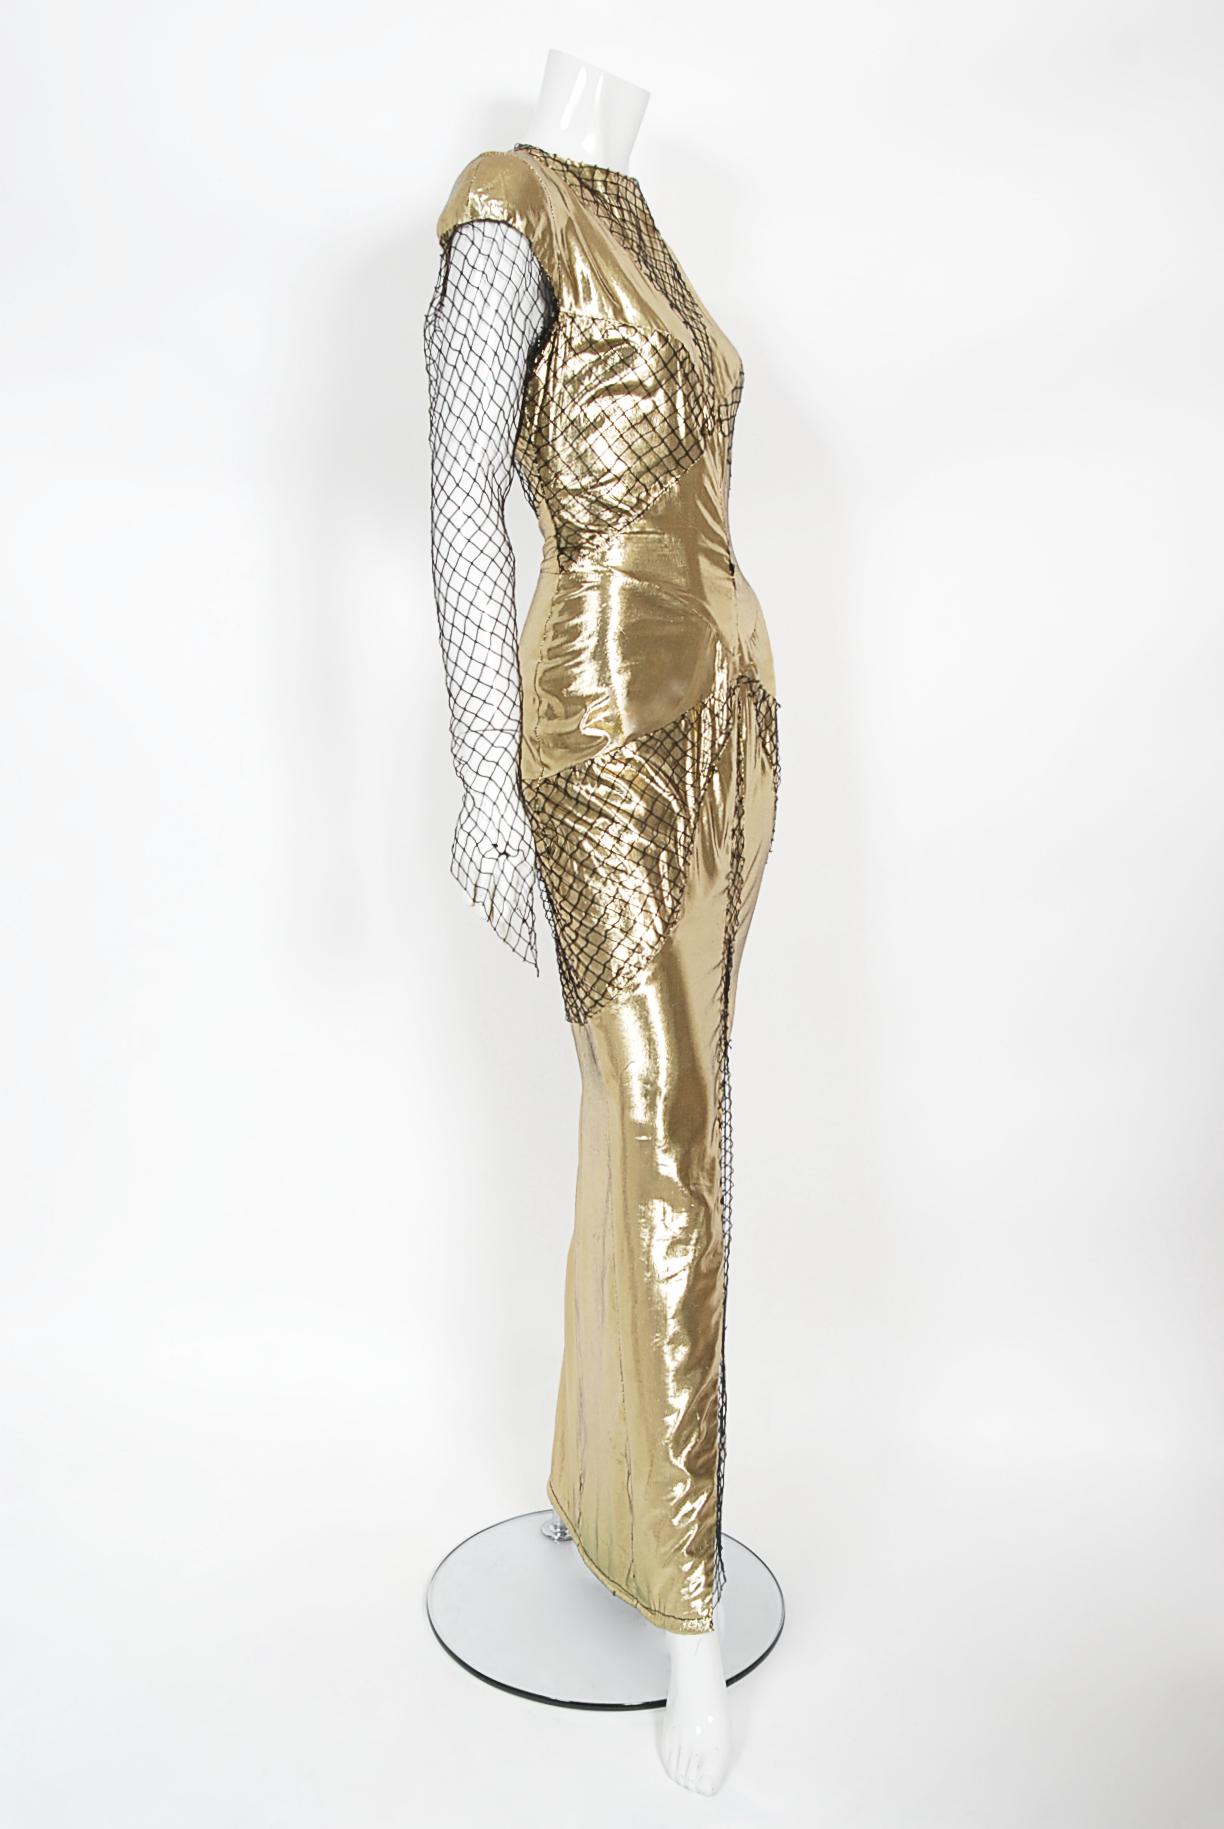 1985 Thierry Mugler Couture Documented Metallic Gold Lamé Fishnet High-Slit Gown For Sale 4